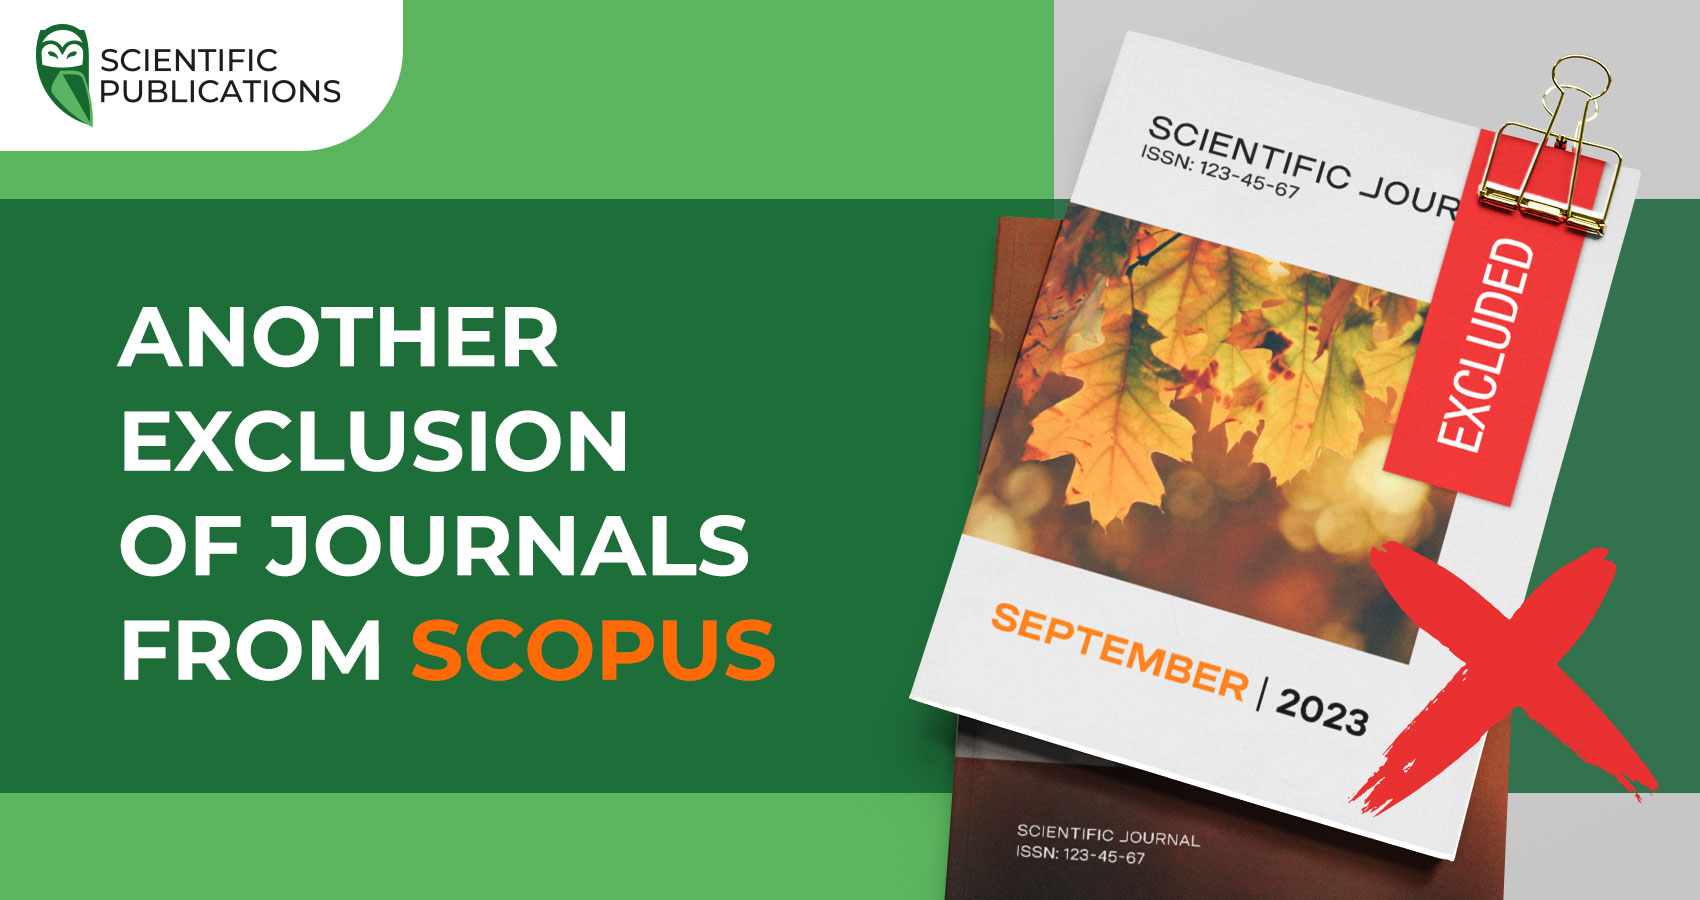 Exclusion of Scopus journals for September 2023